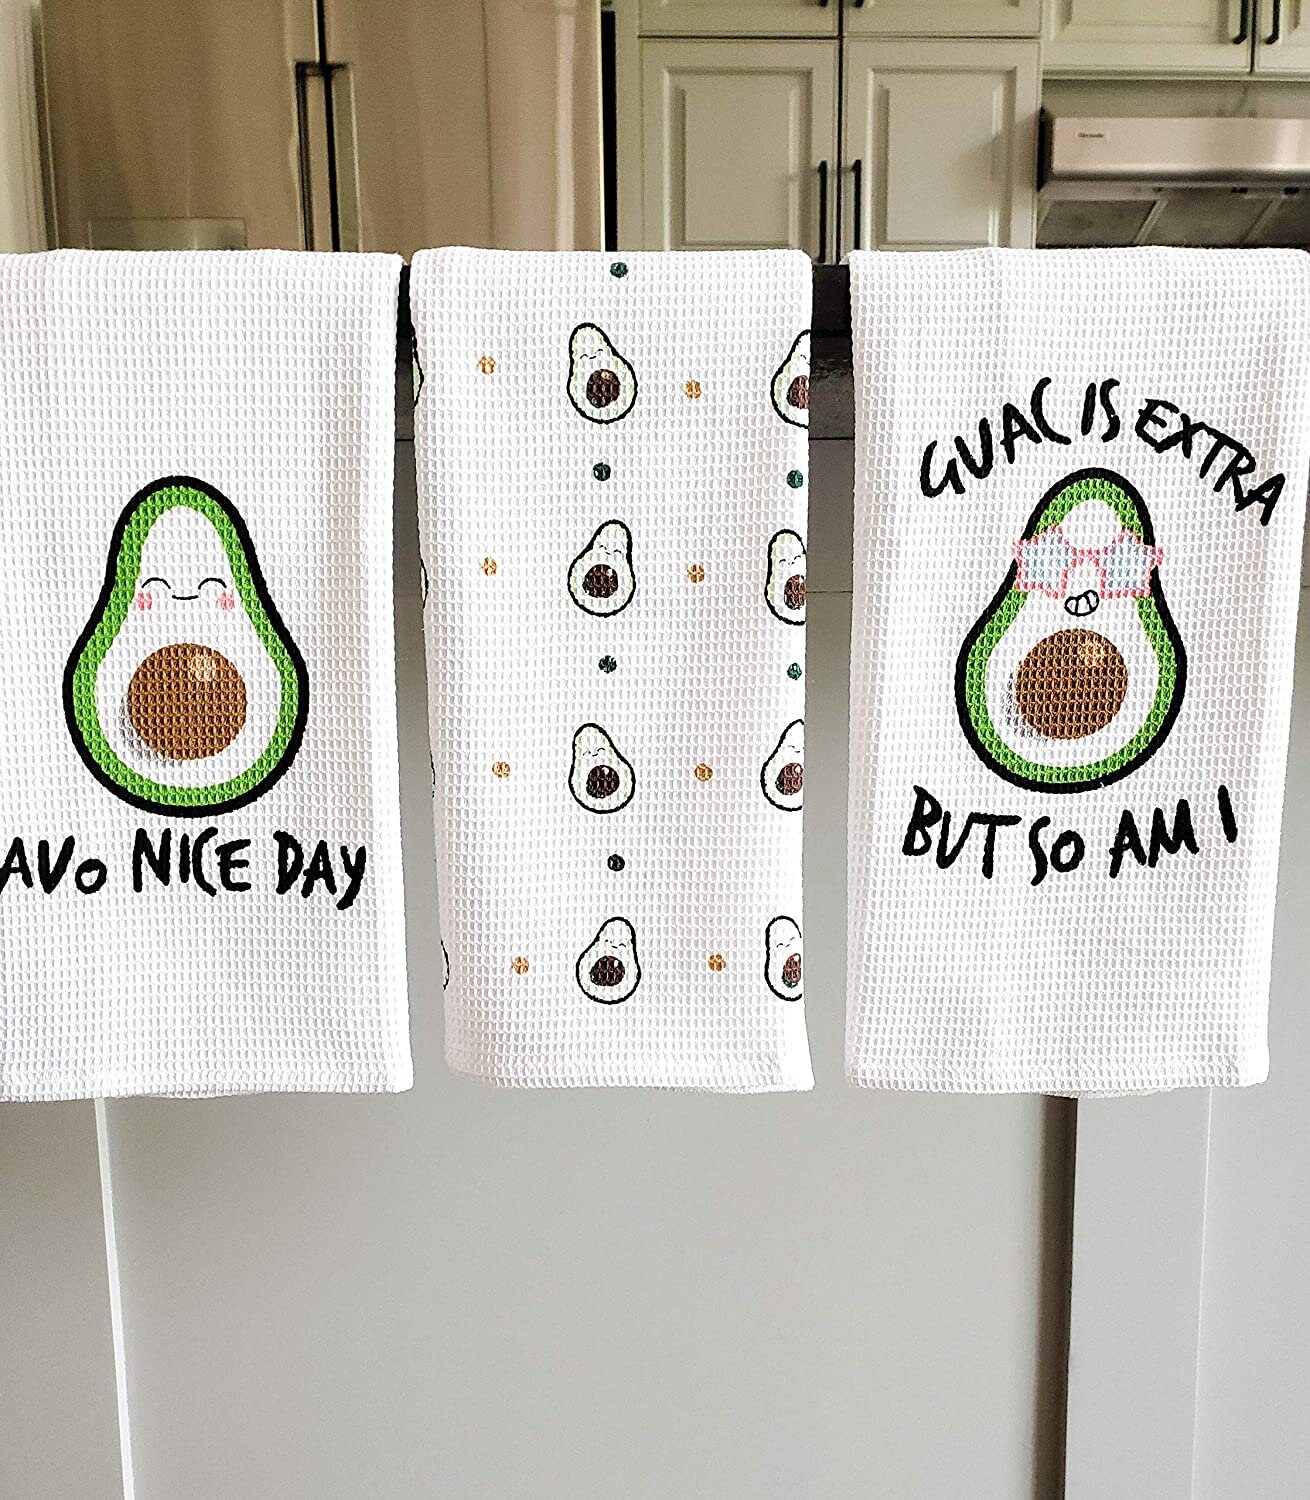  Cotton Kitchen Hand Towels Set, Soft Highly Absorbent 100% Terry  Cloth Tea Towel Simple Funny Design Decorative Durable Large White Bathroom  Powder Room Gift 28 X 12 Inches Set of 3 (